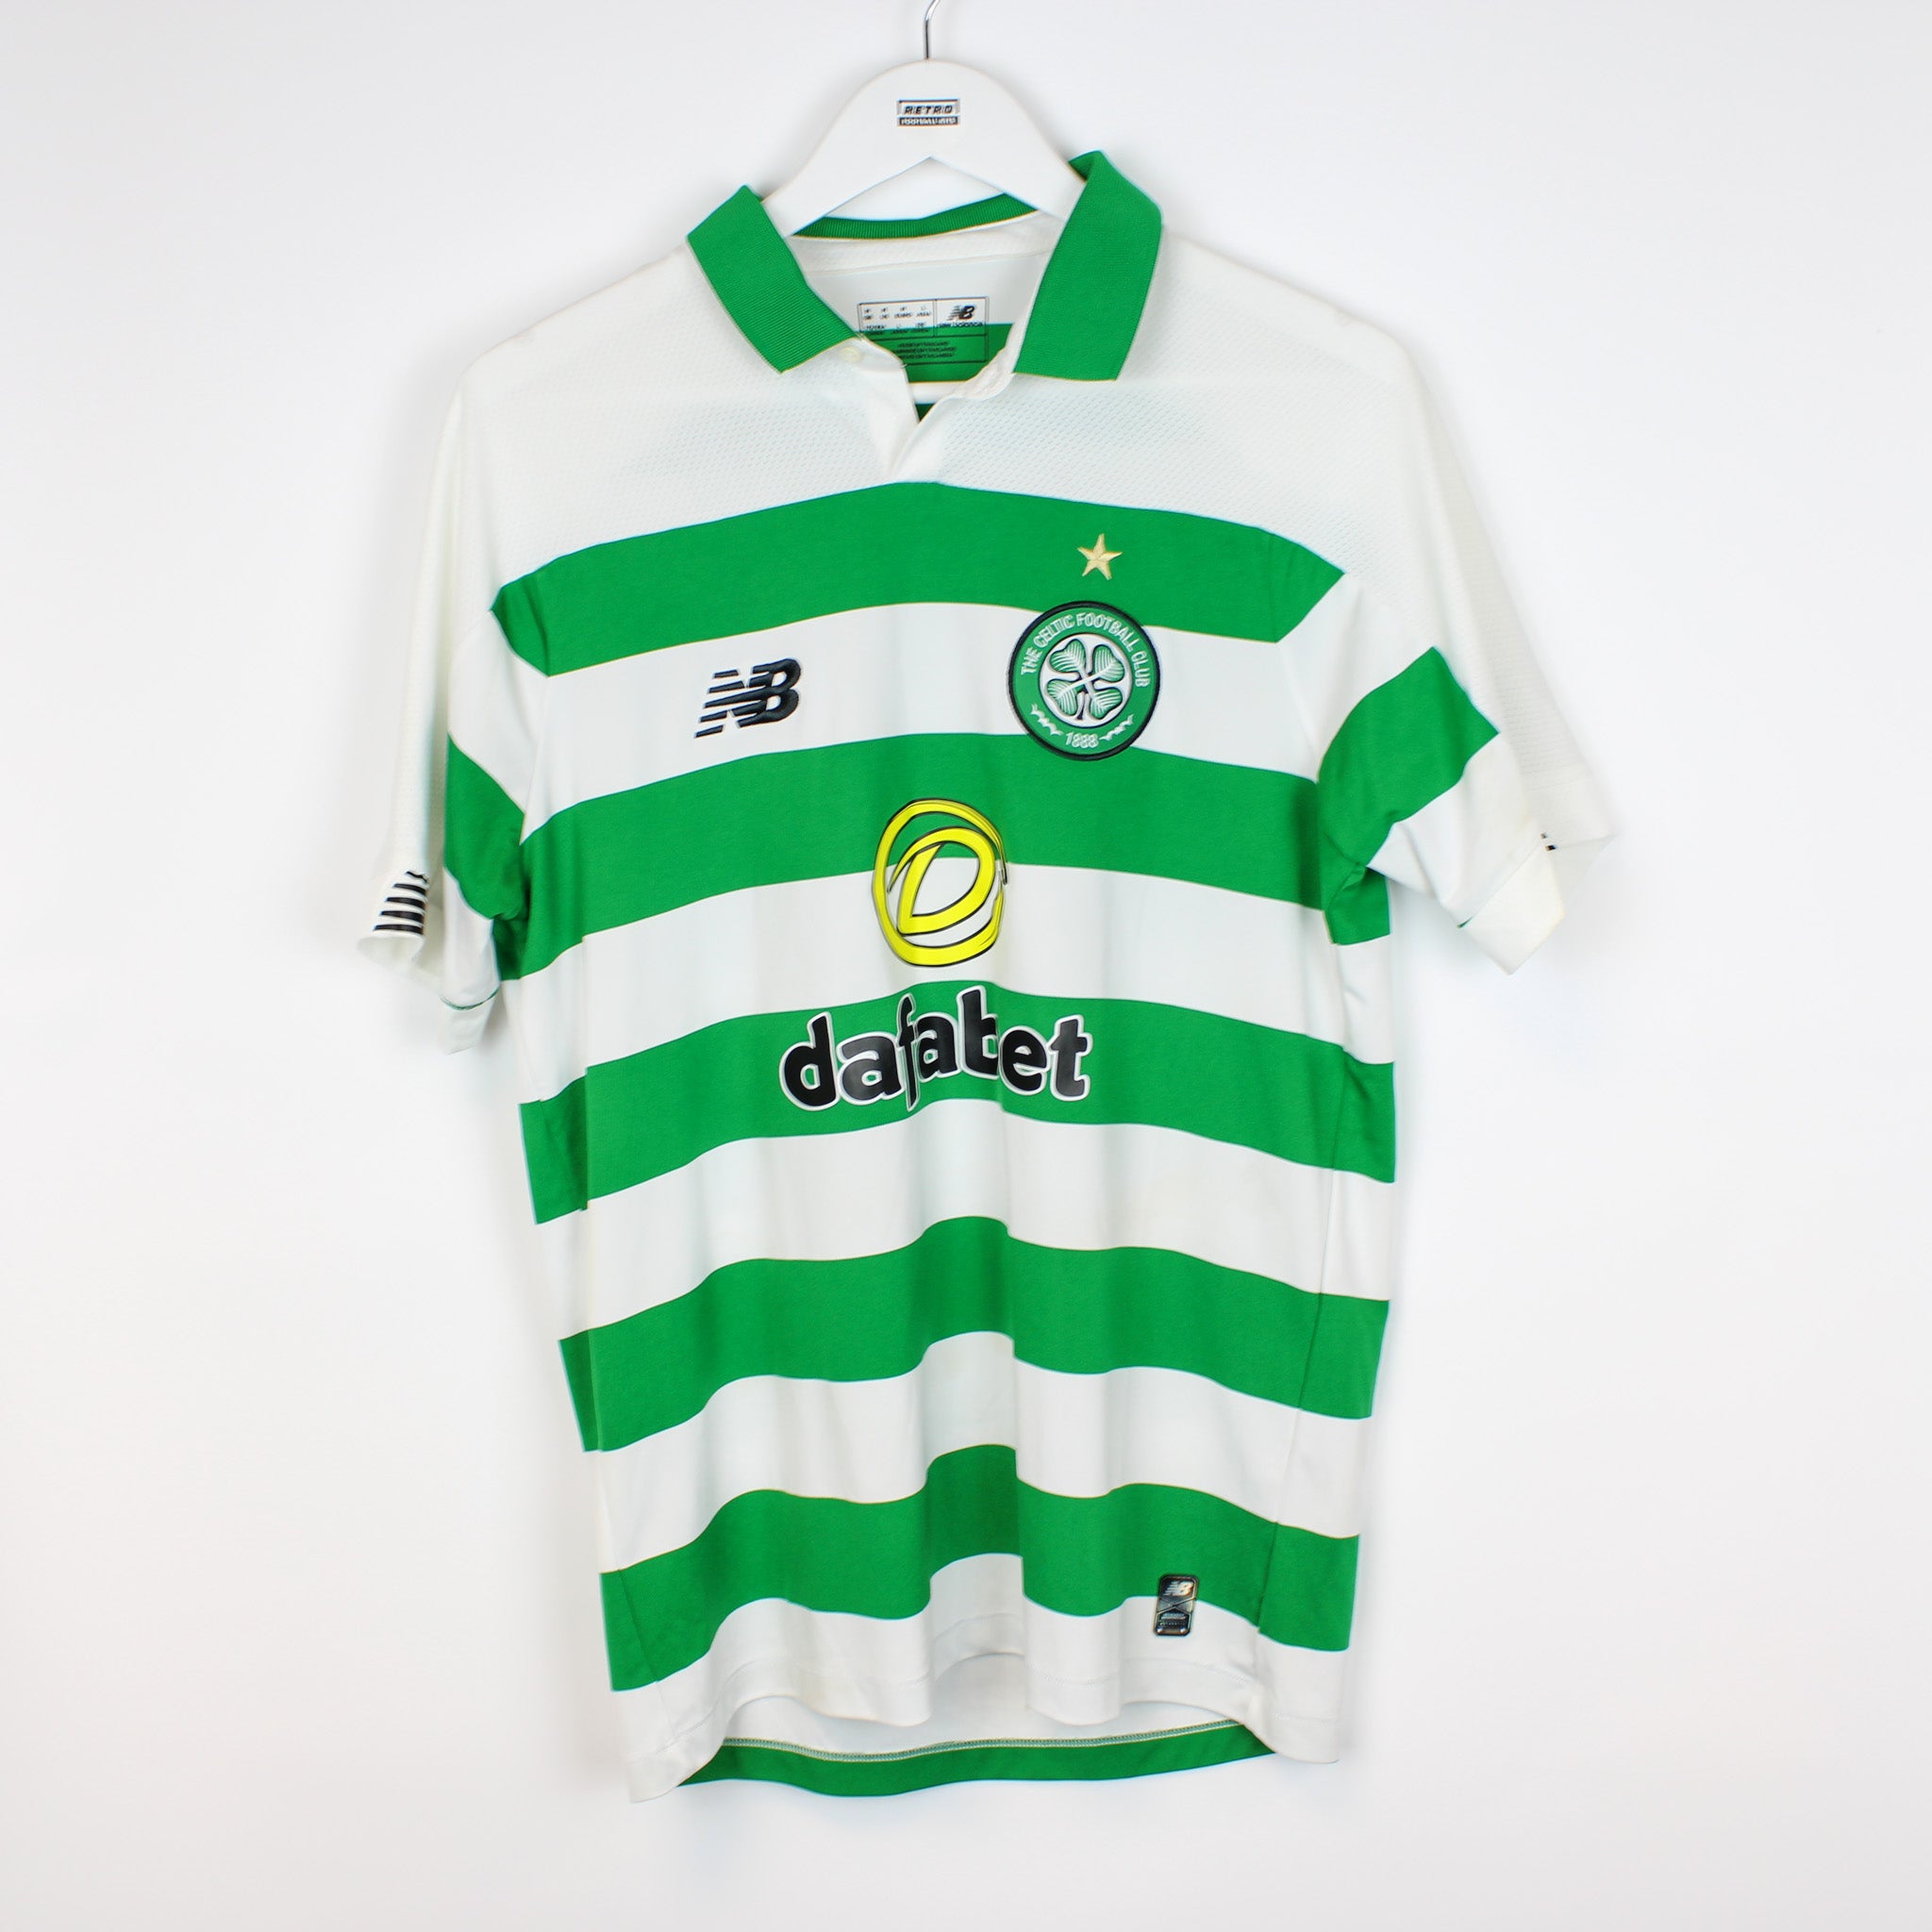 2019/20 Celtic Home Kit Out Now